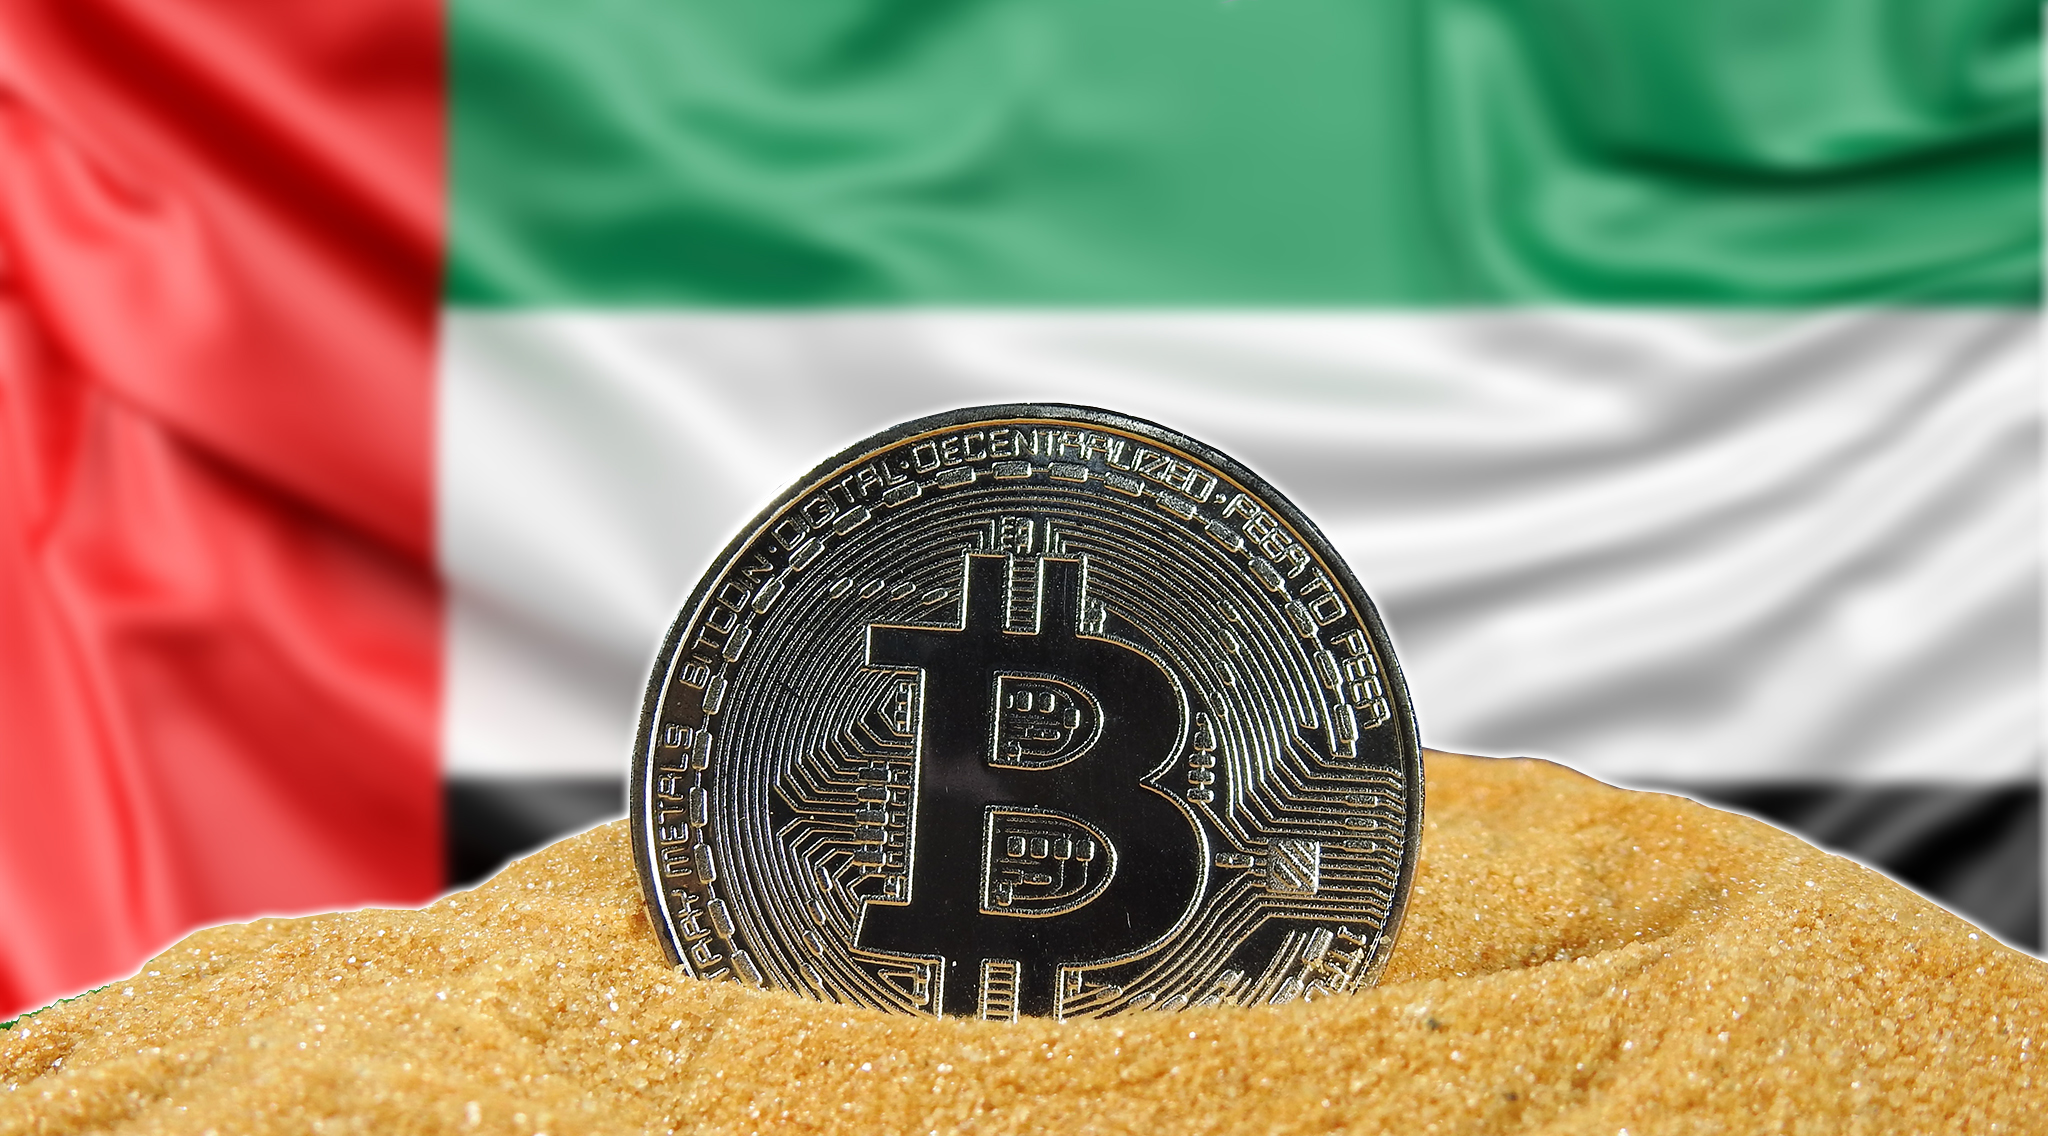 UAE Issuing a CBDC To Promote Crypto Payments In The Country